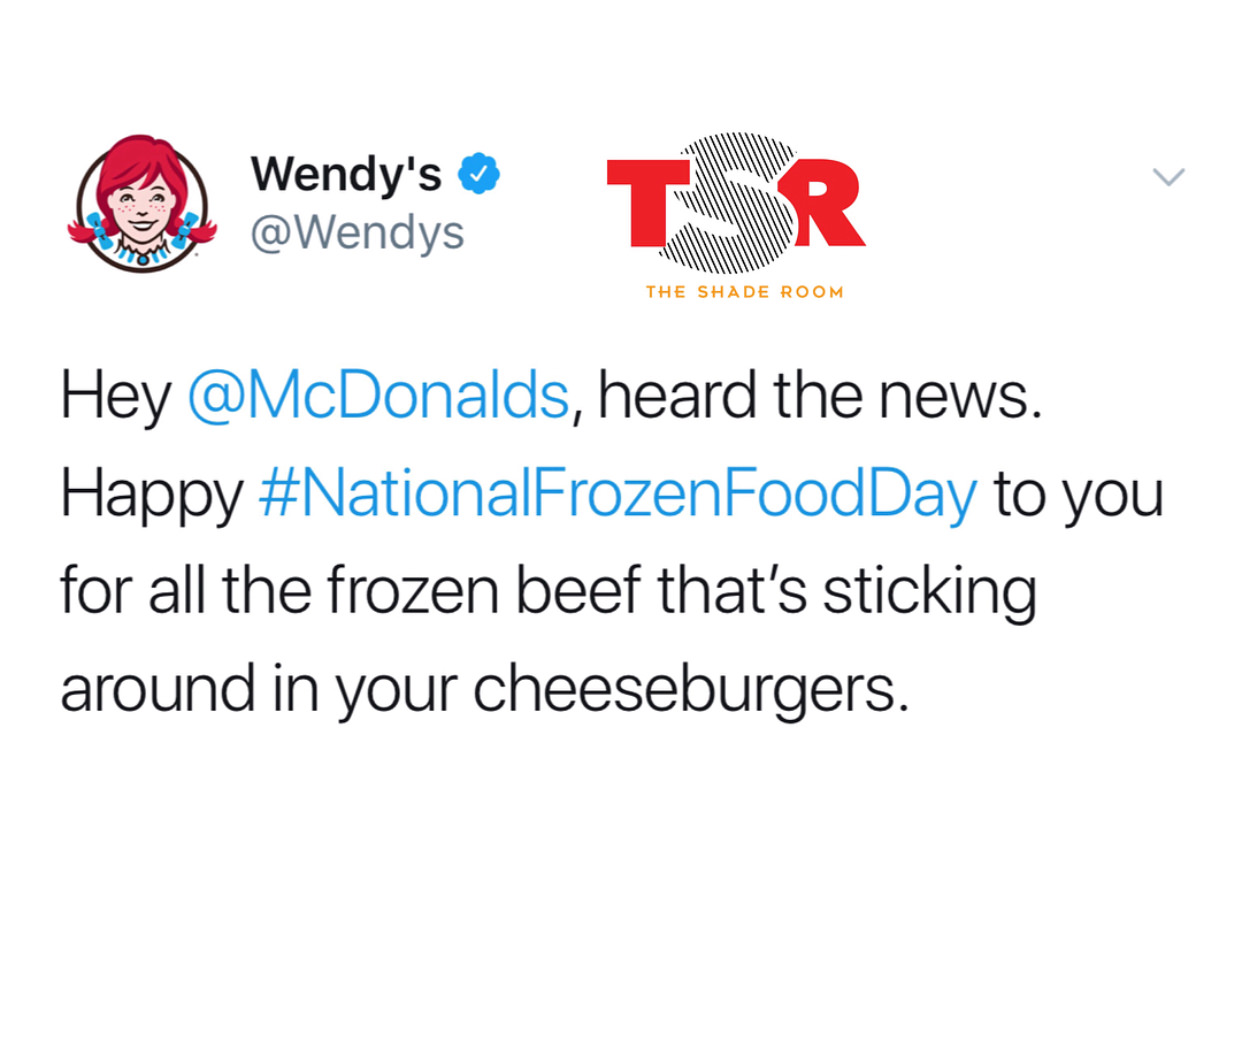 mcdonalds and wendy's twitter beef - Wendy's The Shade Room Hey , heard the news. Happy Frozen FoodDay to you for all the frozen beef that's sticking around in your cheeseburgers.